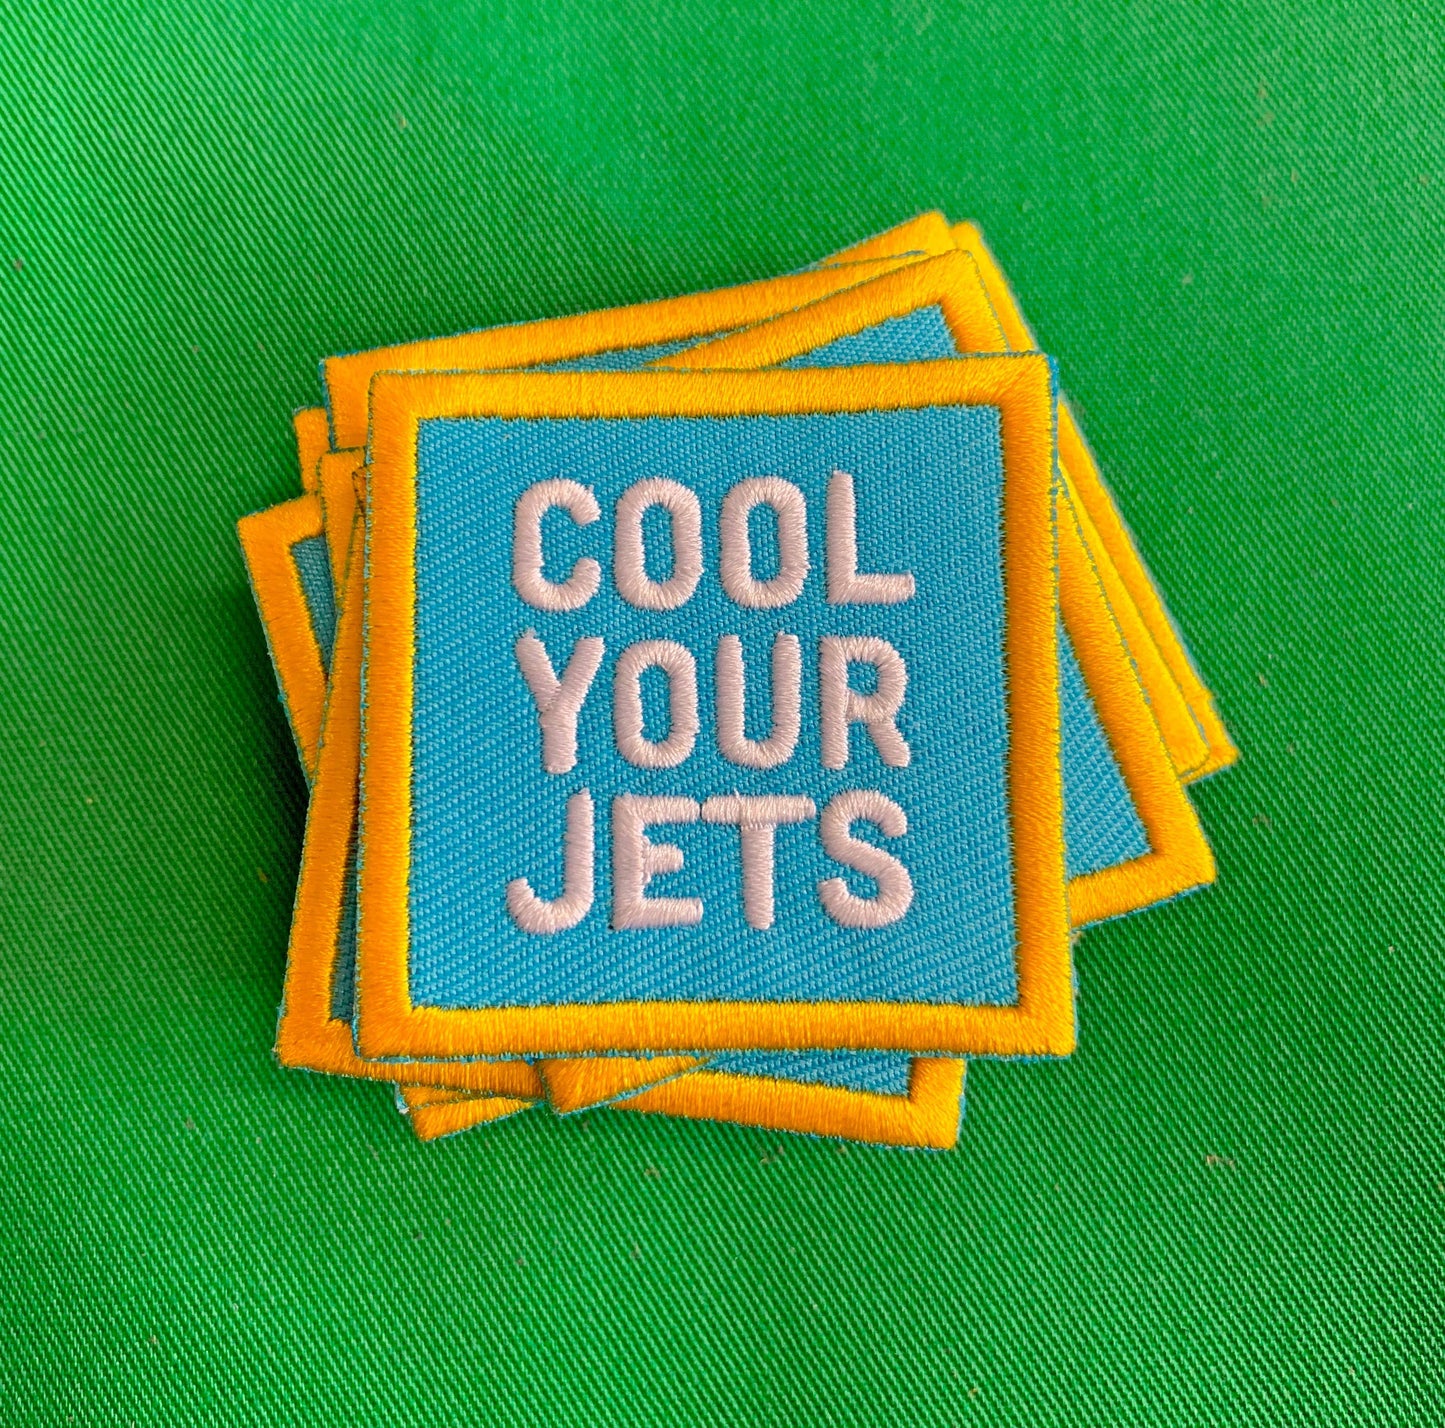 Cool Your Jets Iron On Patch